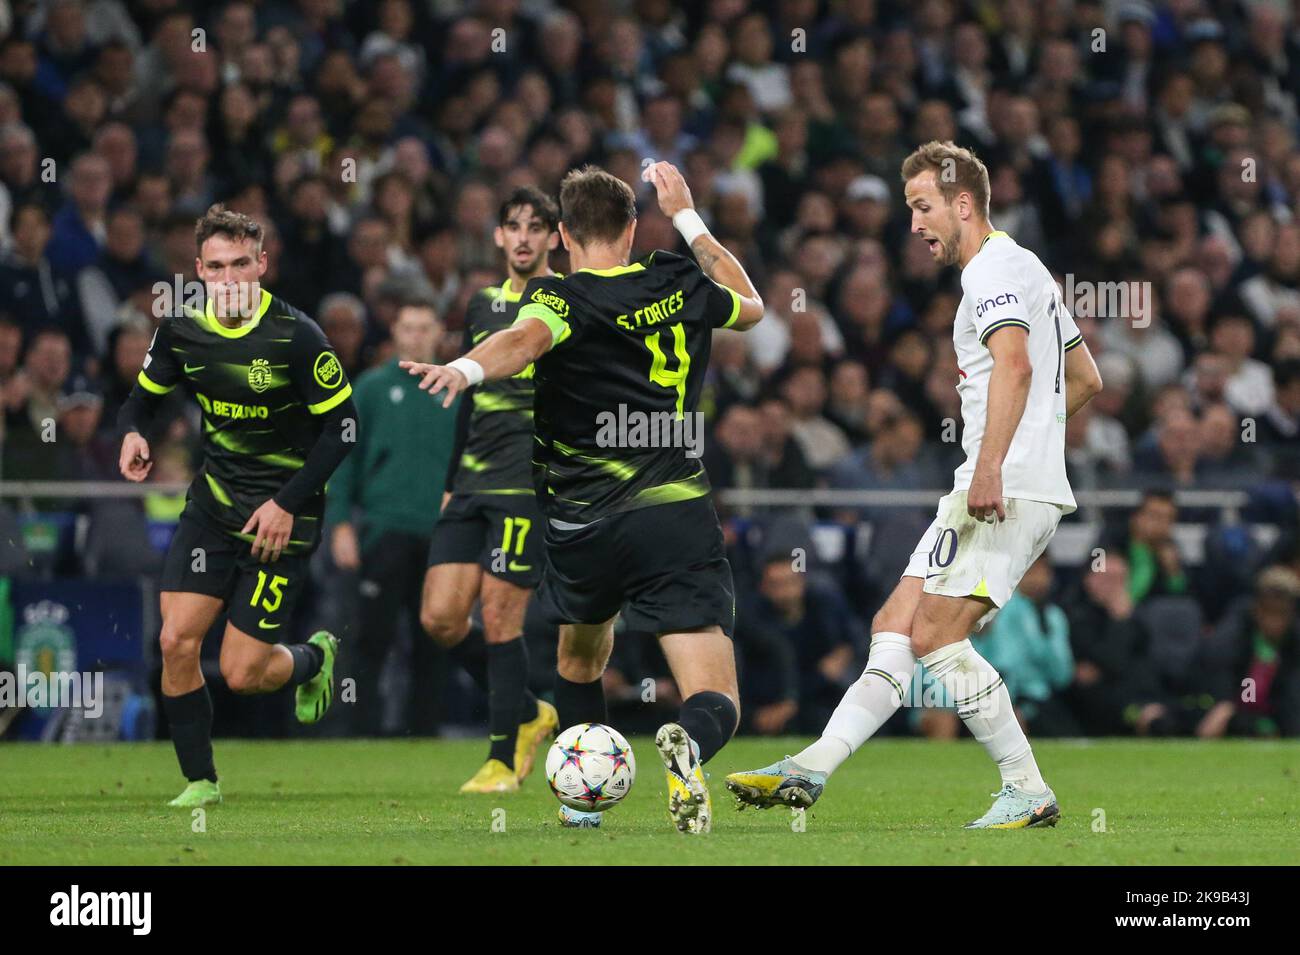 London, UK. 26th Oct, 2022. Harry Kane #10 of Tottenham Hotspur passes the ball through the legs of Sebastián Coates #4 of Sporting Lisbon during the UEFA Champions League match Tottenham Hotspur vs Sporting Lisbon at Tottenham Hotspur Stadium, London, United Kingdom, 26th October 2022 (Photo by Arron Gent/News Images) Credit: News Images LTD/Alamy Live News Stock Photo